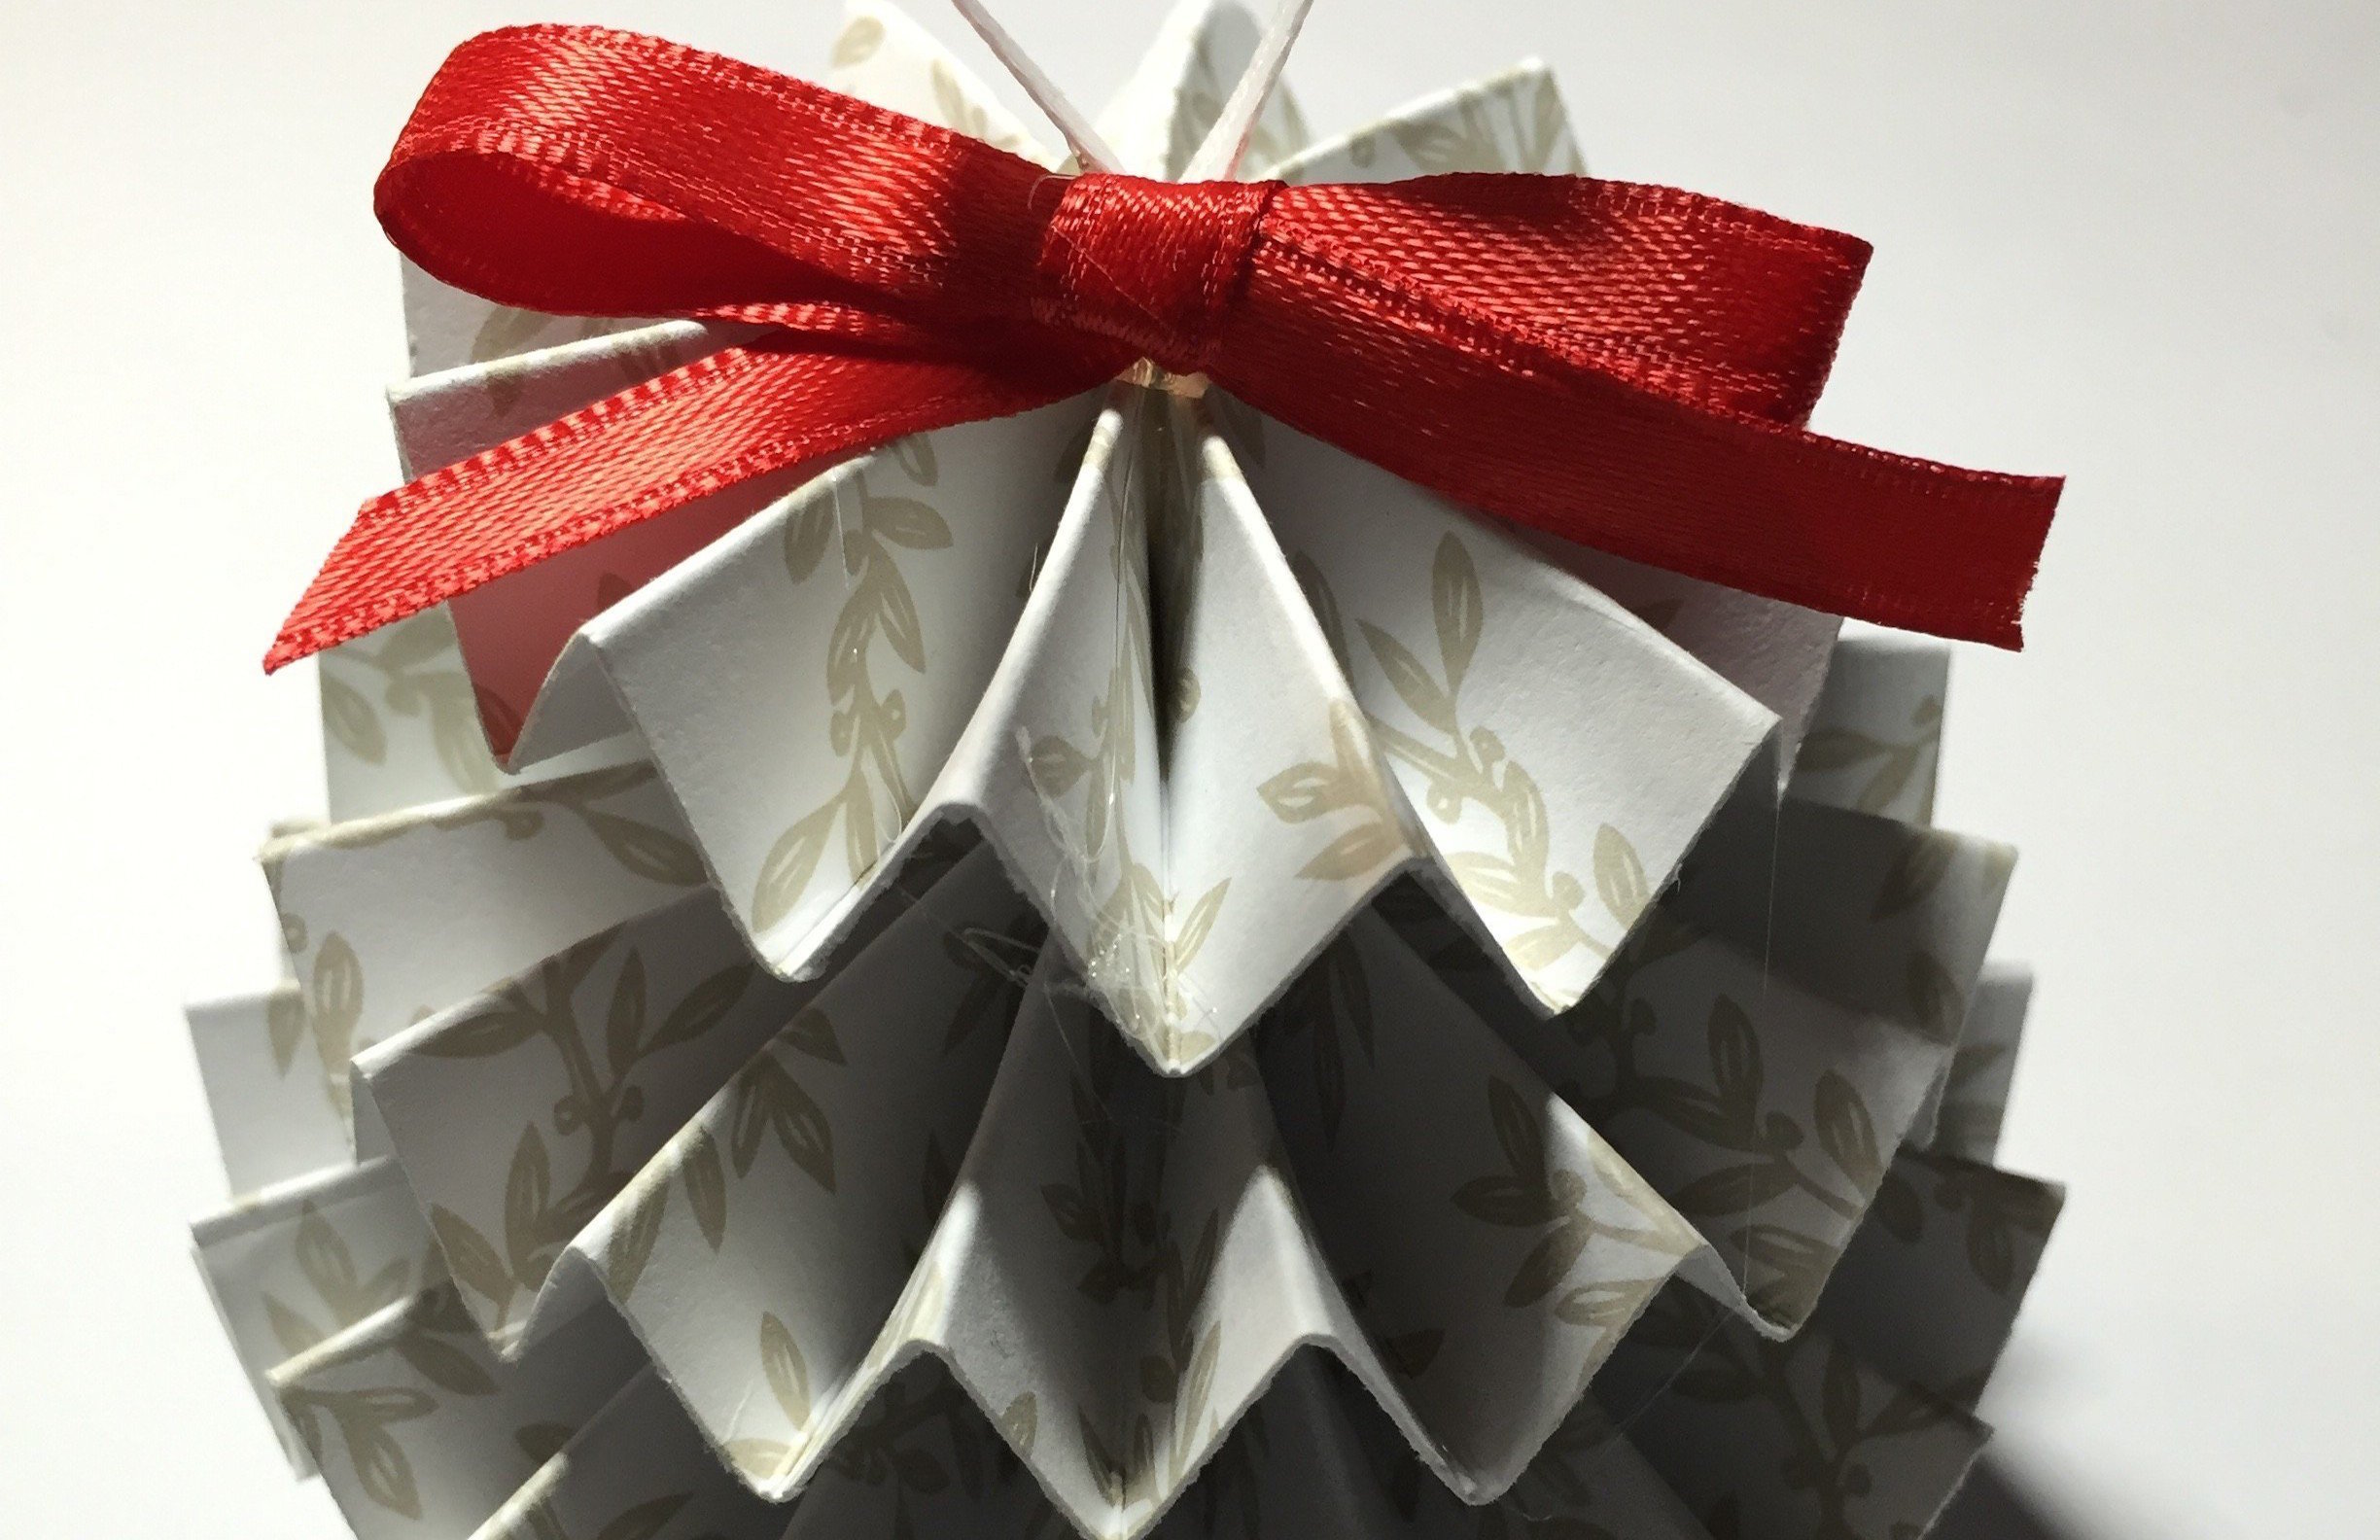 5-Minute Project: Paper Christmas Tree Ornaments